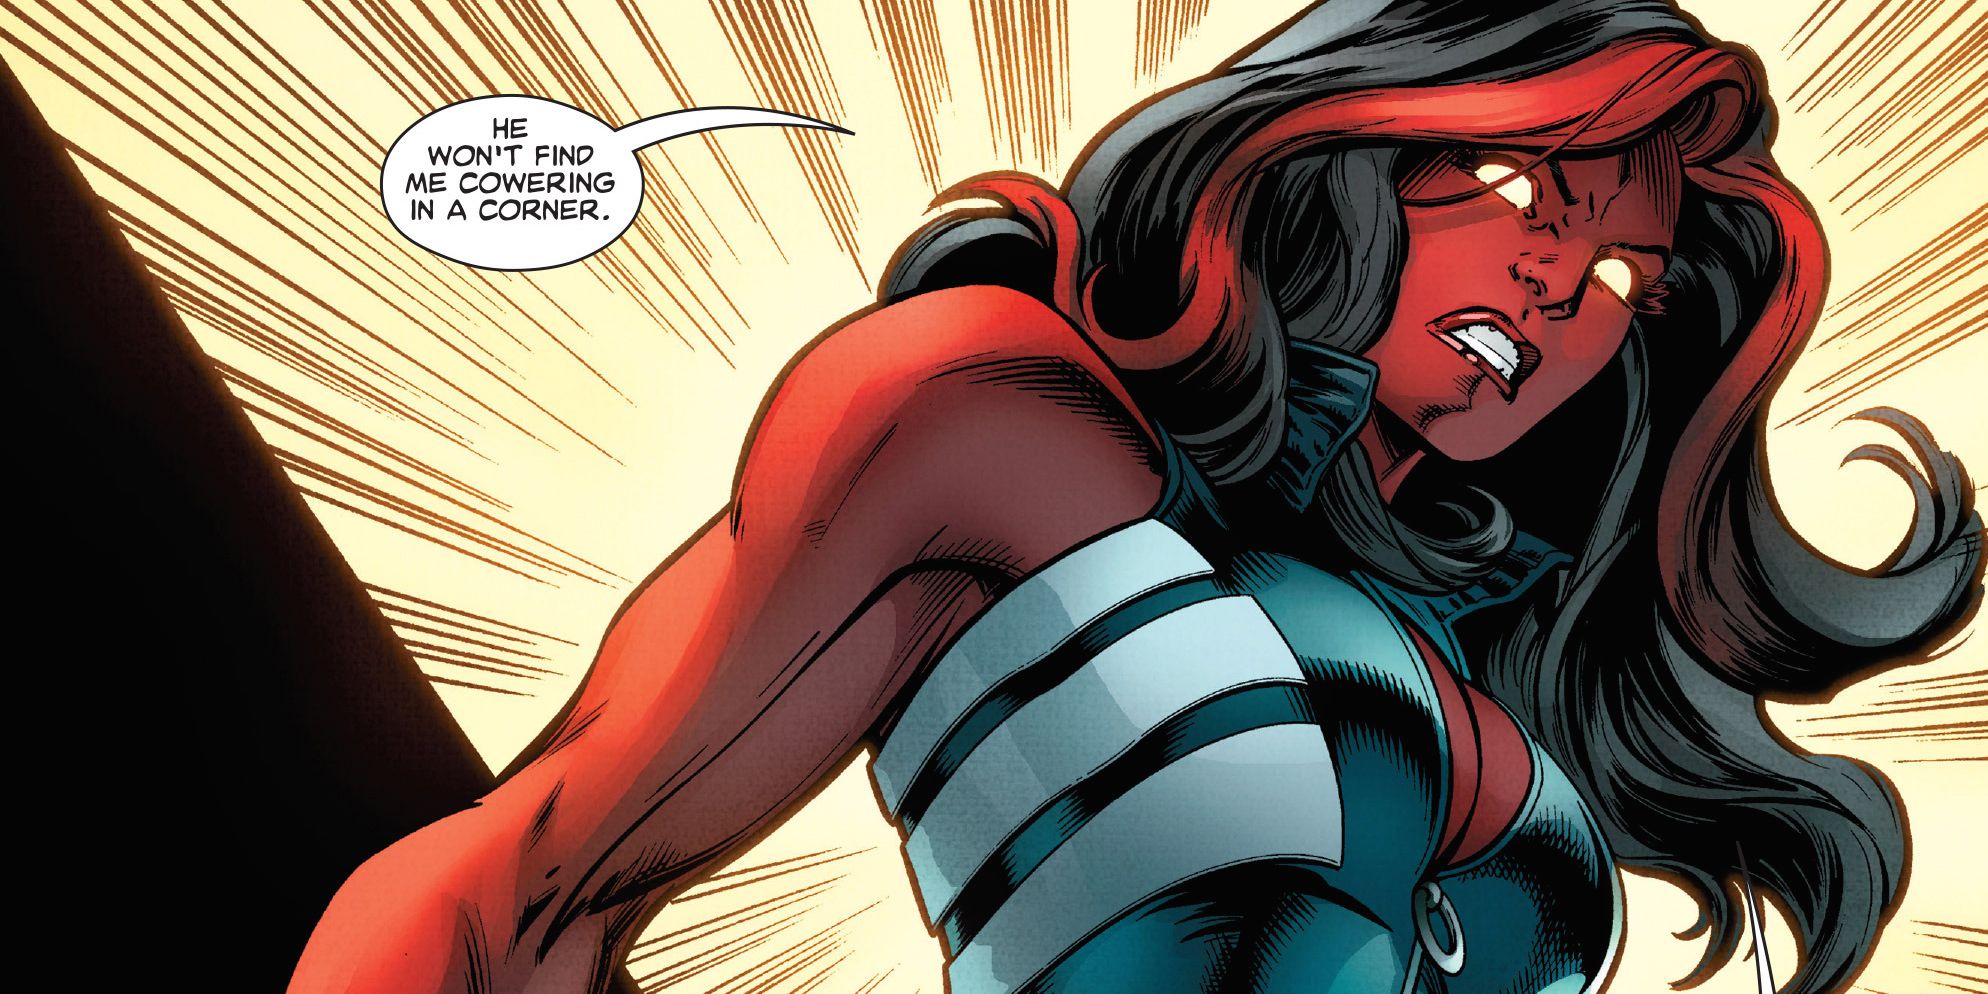 Red She-Hulk prepares to fight in Marvel Comics.